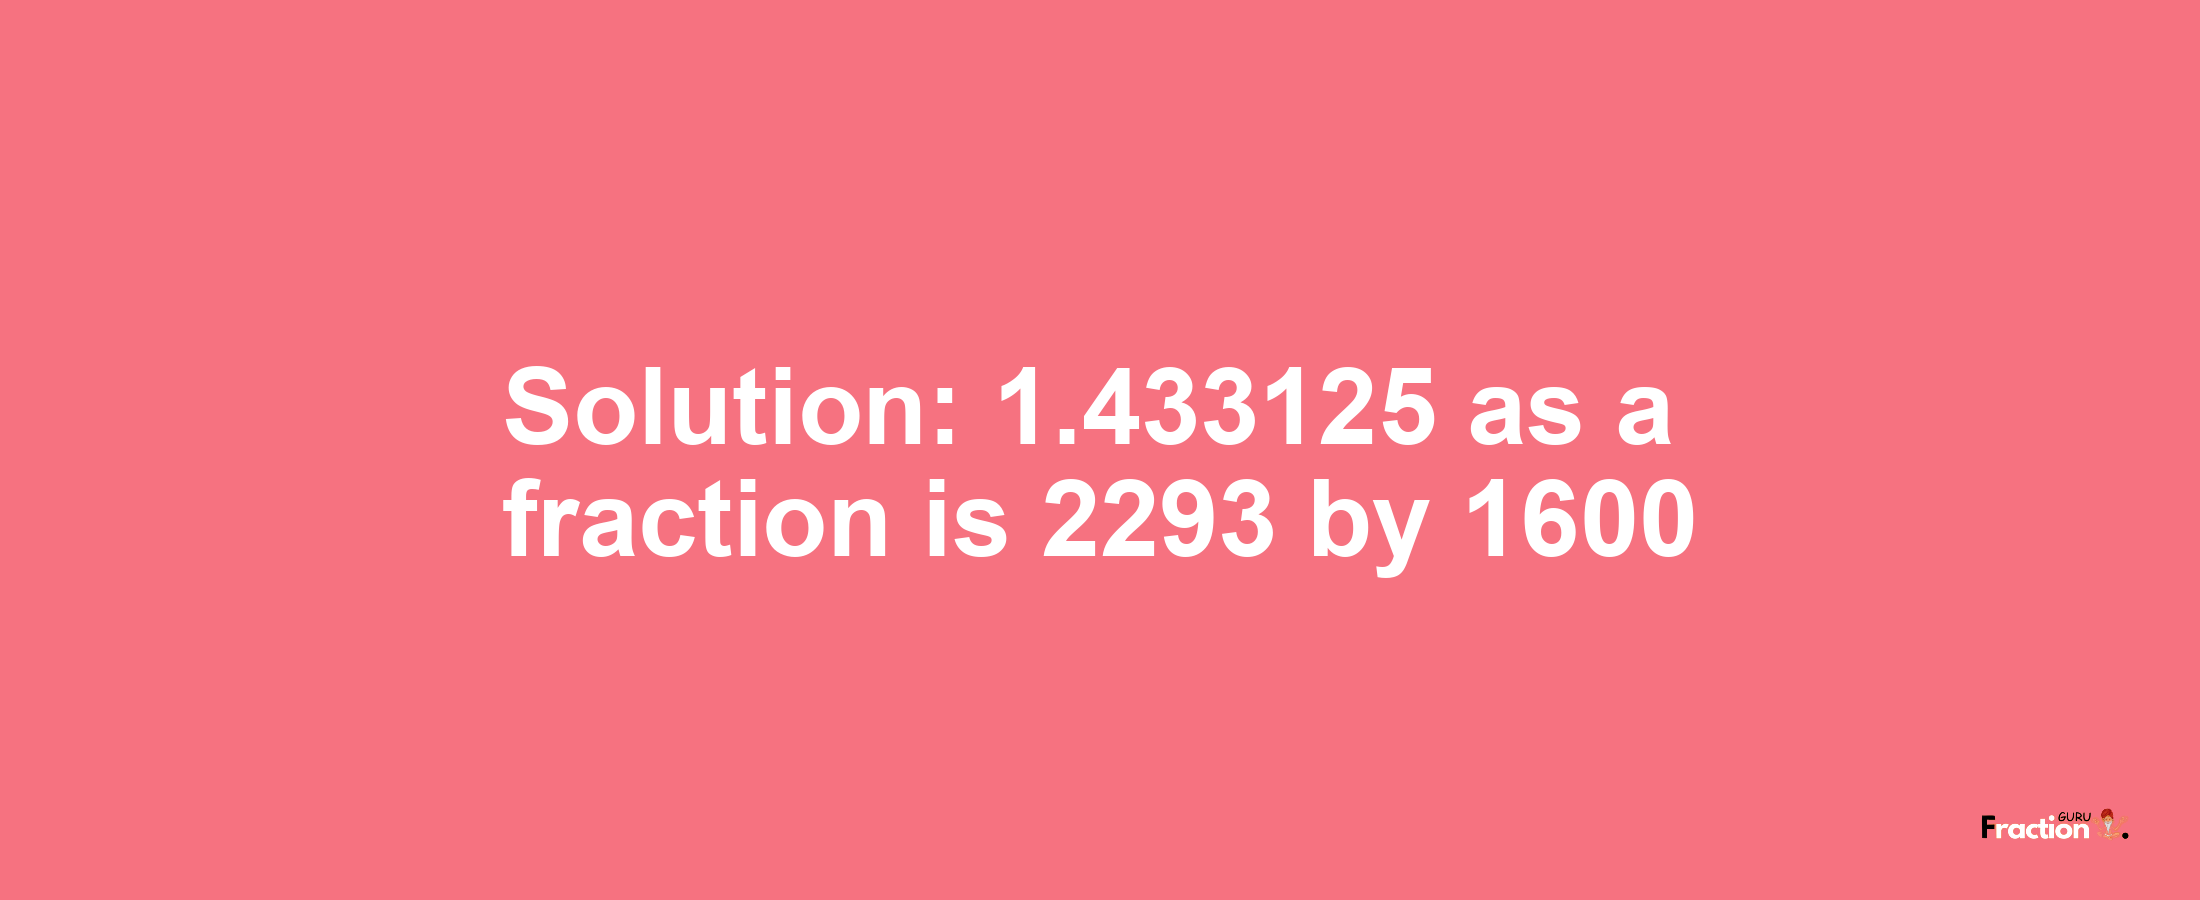 Solution:1.433125 as a fraction is 2293/1600